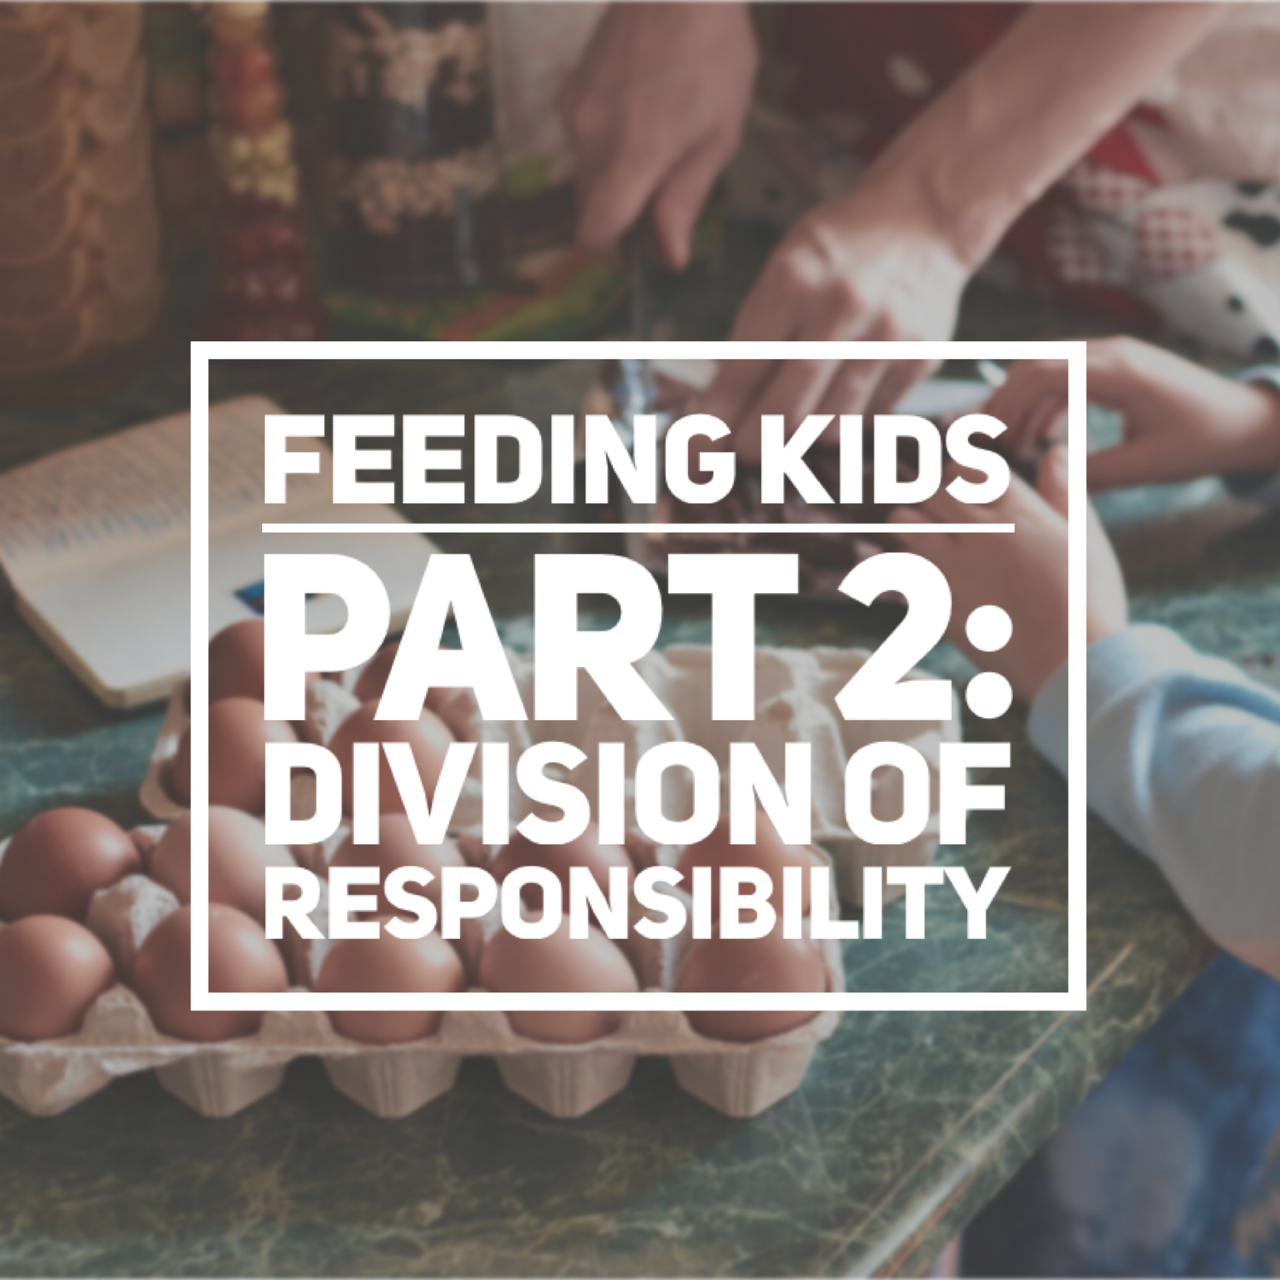 Feeding Kids Part 2: Division of Responsibility